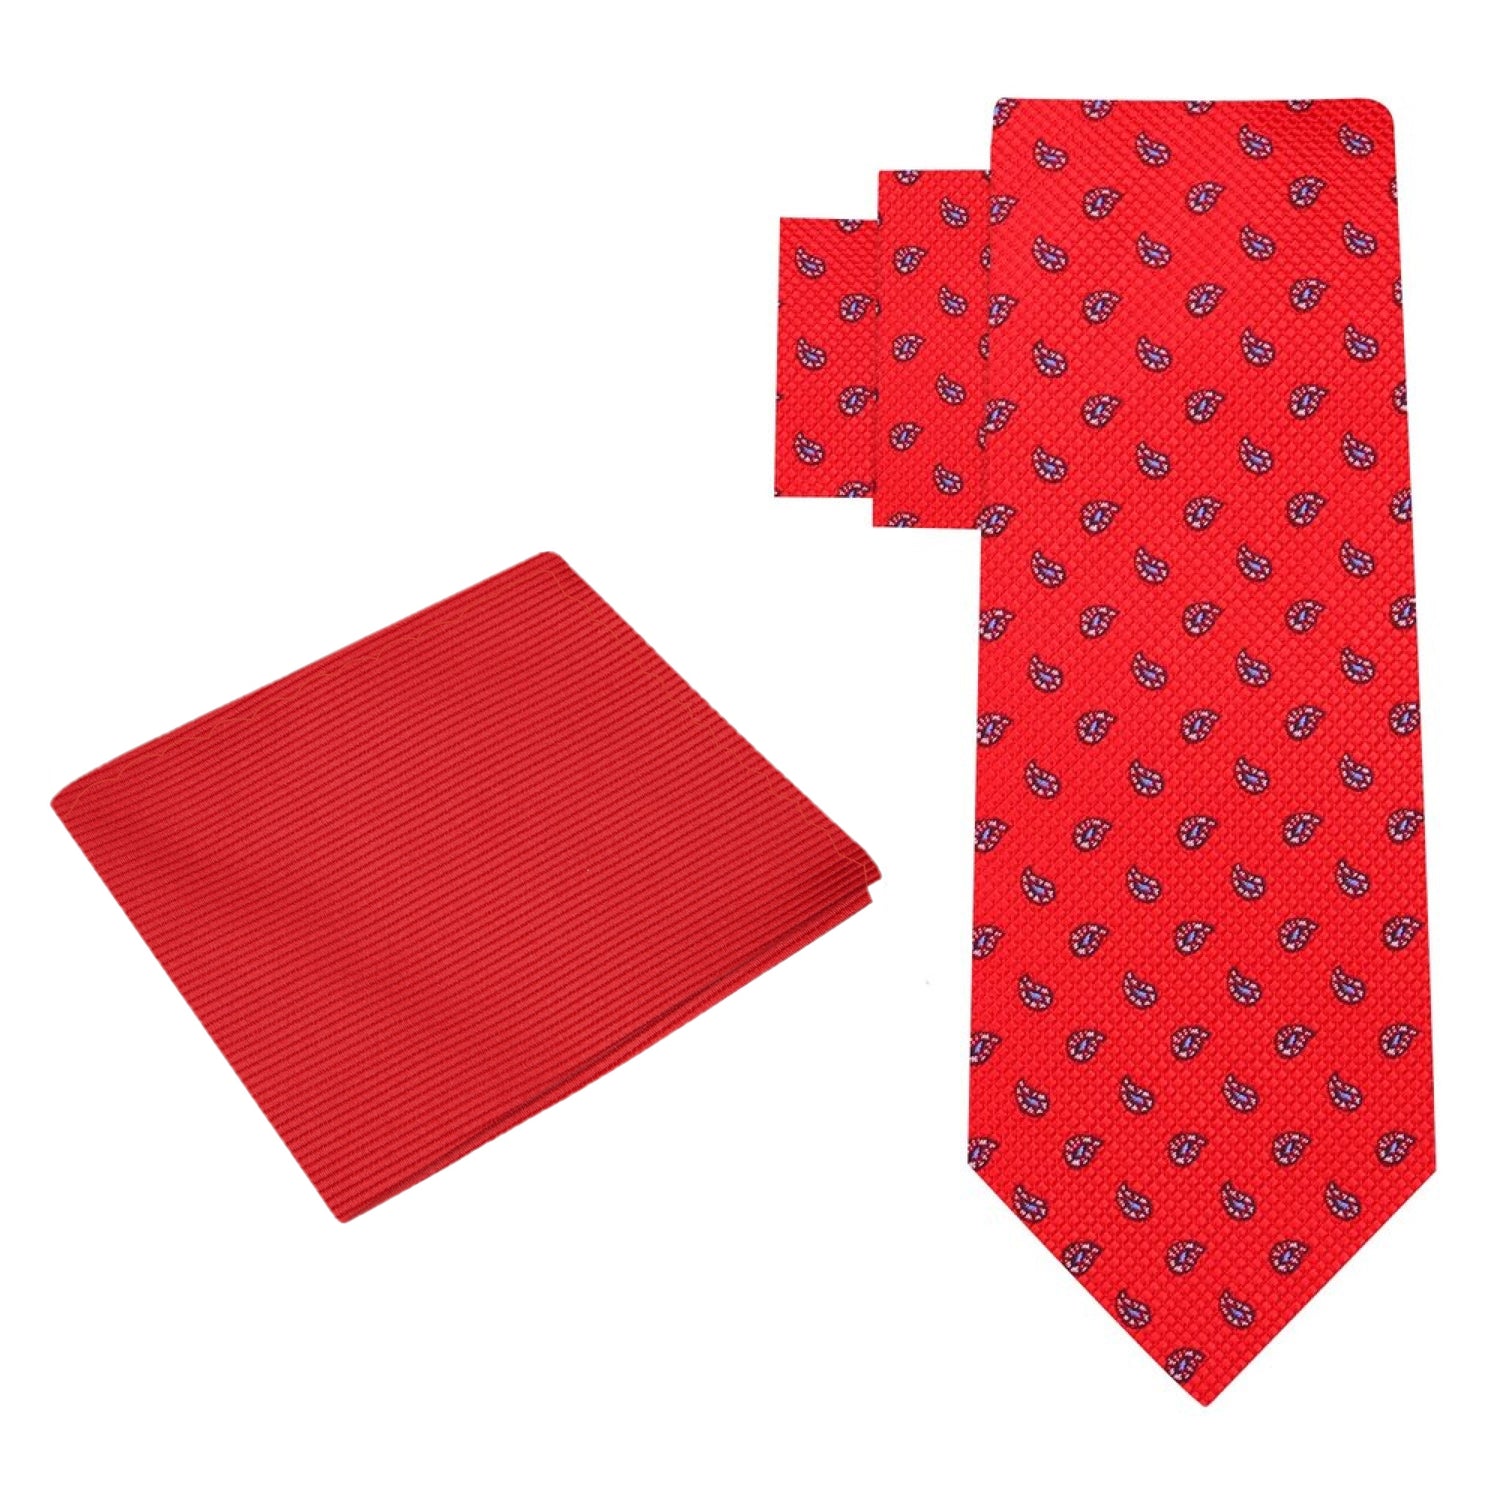 Alt View: Red, Light Blue, Black Paisley Tie and Pocket Square